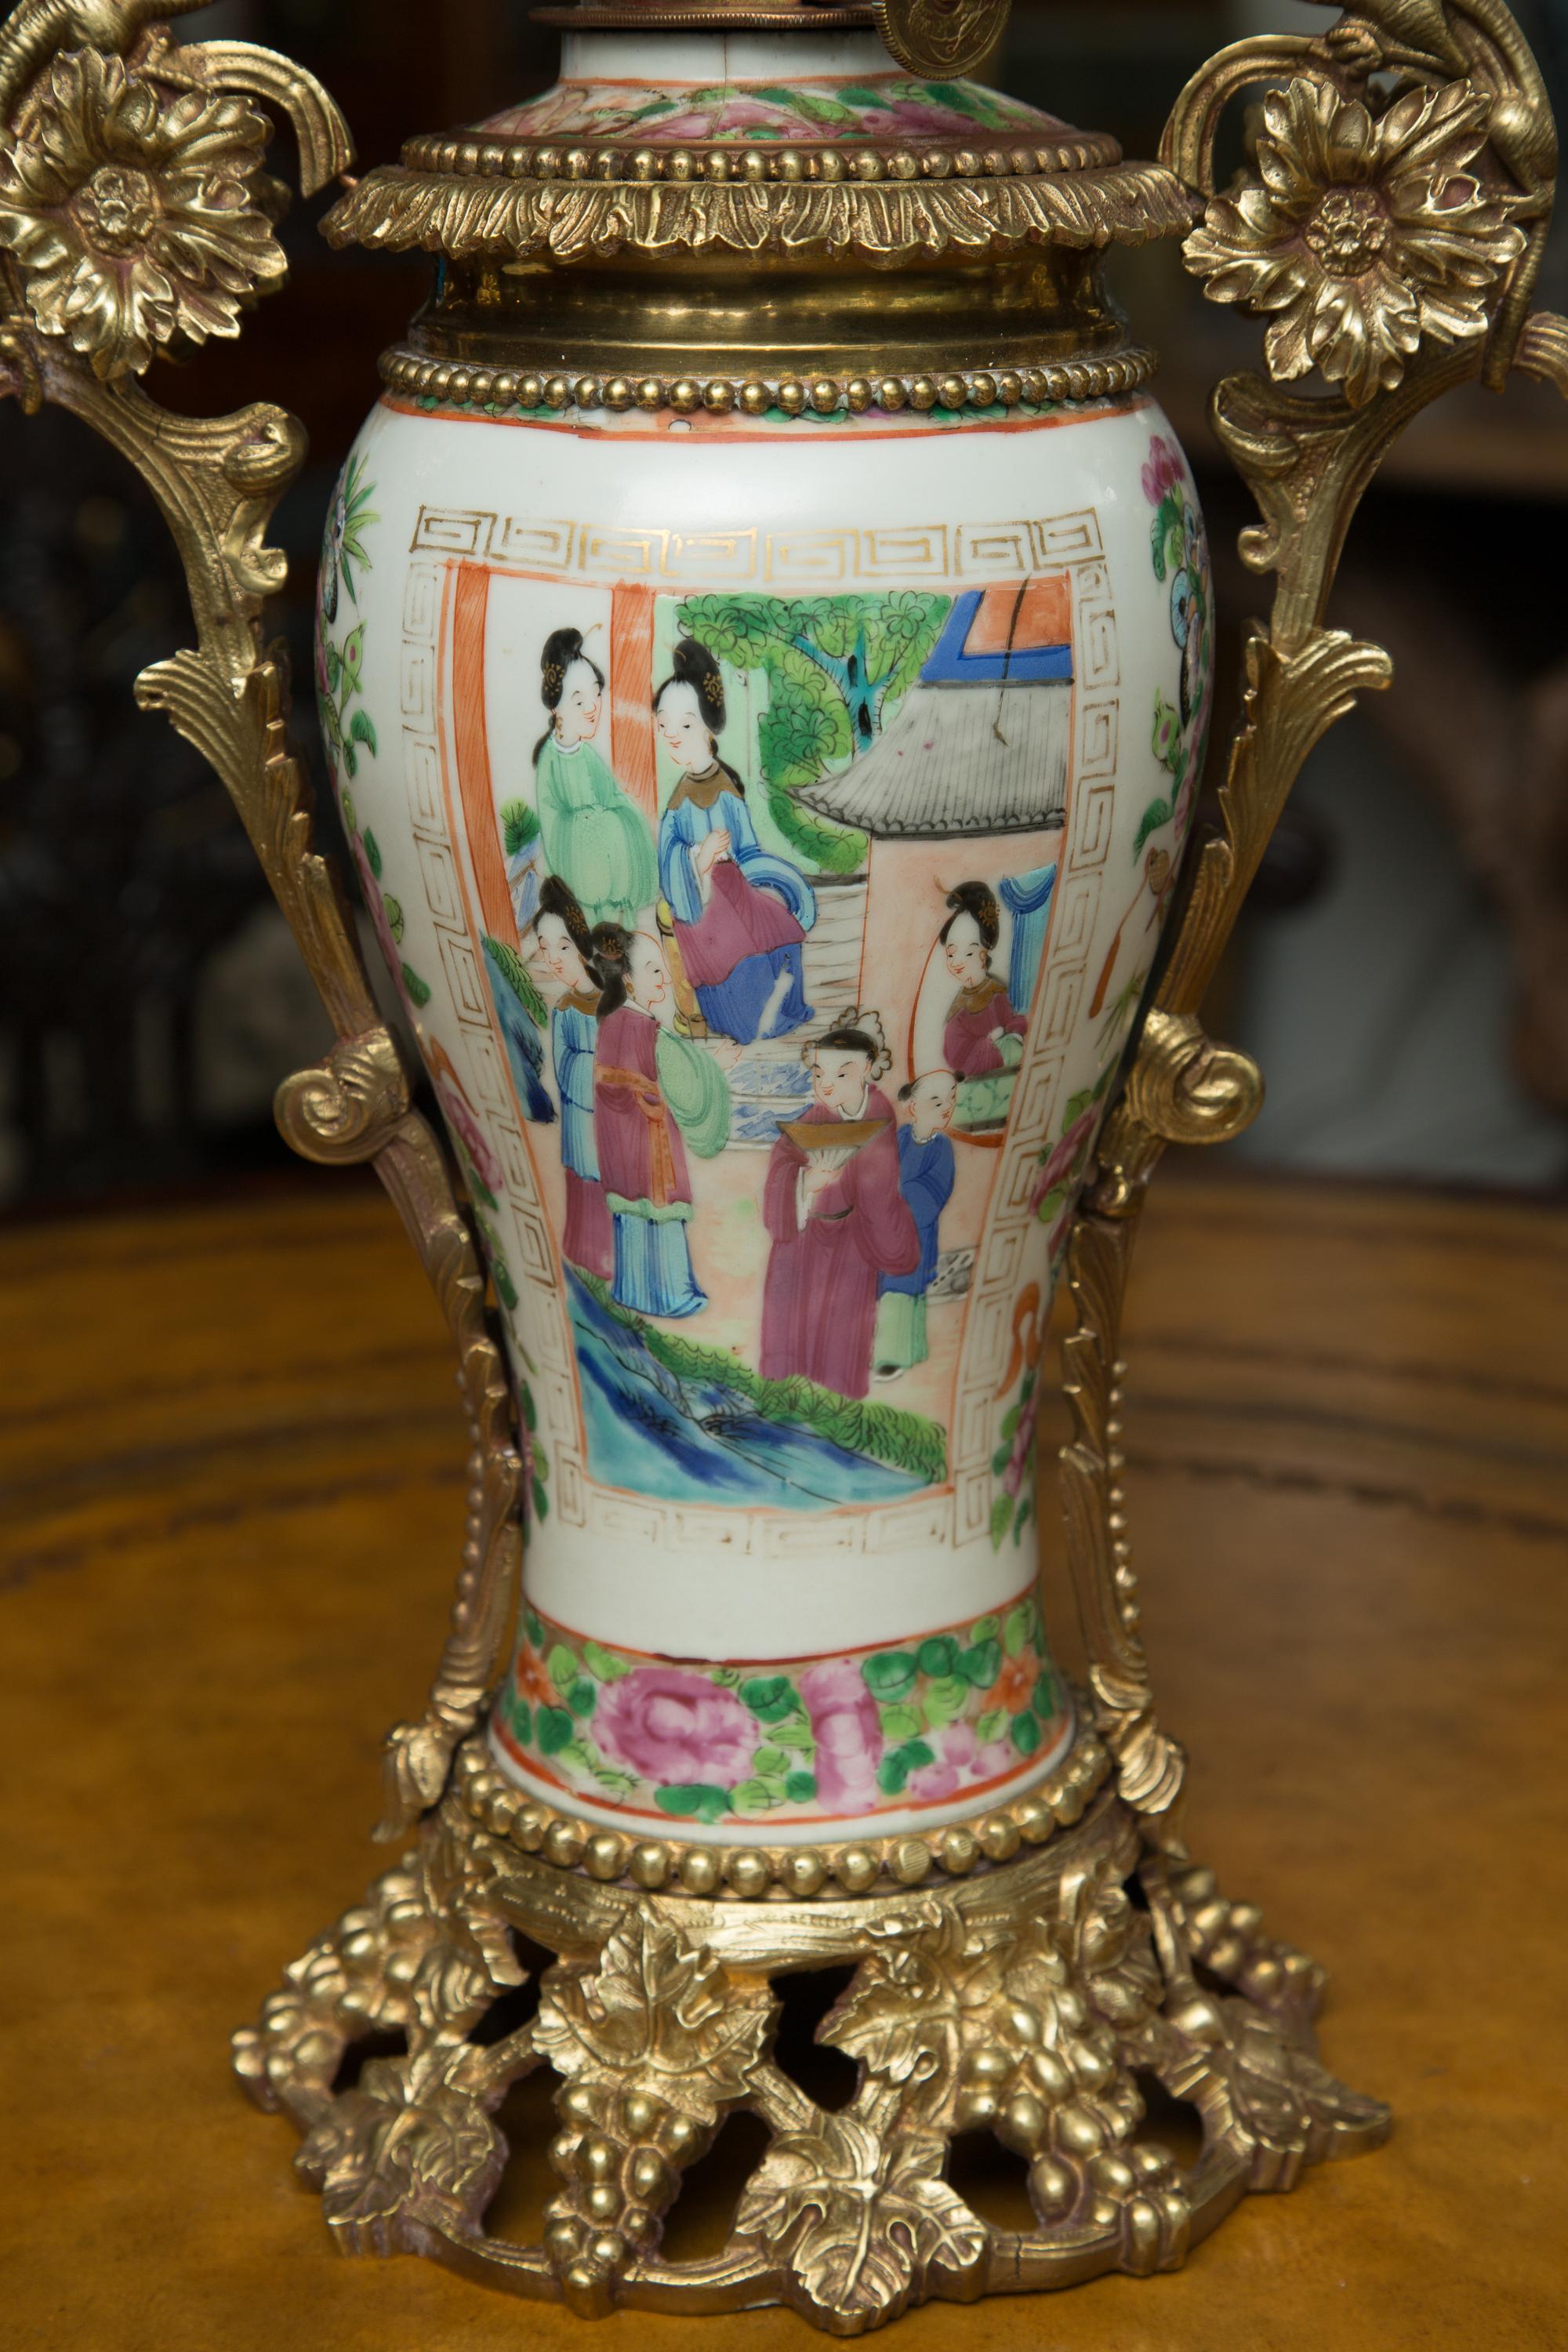 This is a lovely Chinese Famille Rose vase decorated with a centralized scene depicting Classic Chinese figures and floral motif, electrified as a lamp and ensconced in ornate gilt metal mounts, 19th Century.